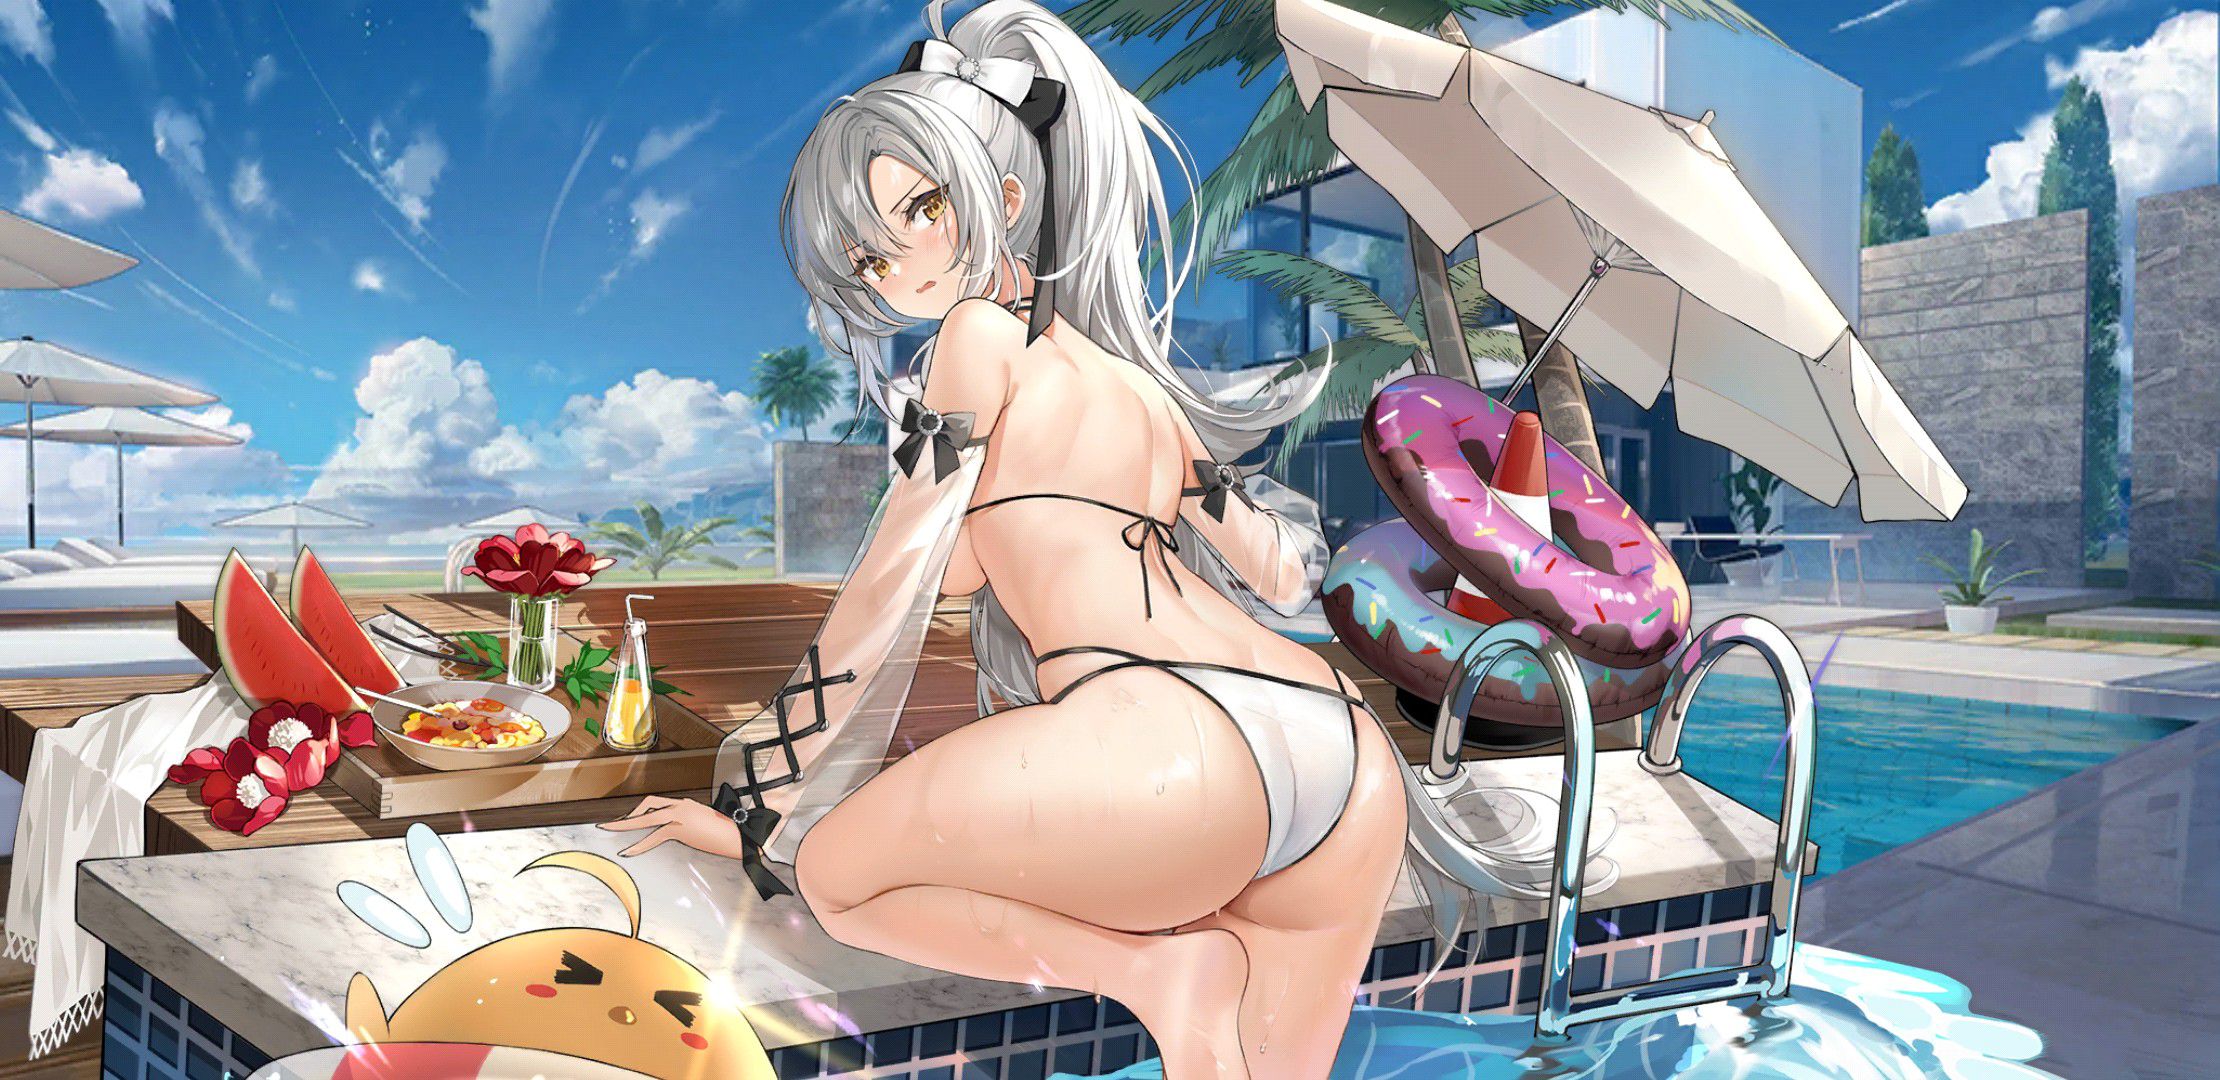 【There is an image】 Smartphone that urges charging with erotic swimsuits is malicious 44